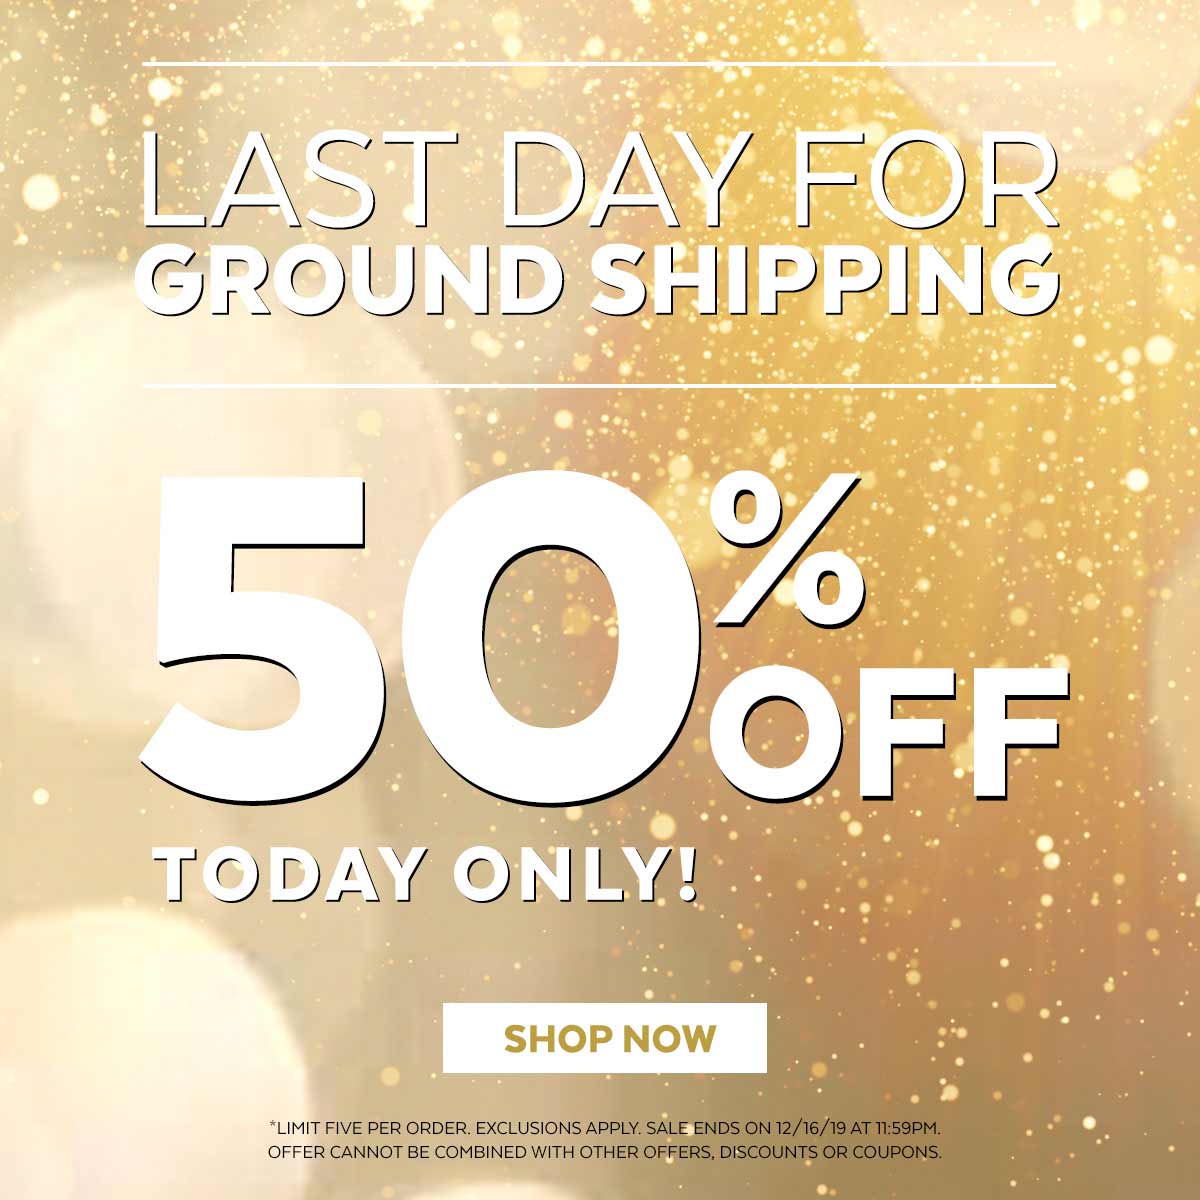 Last day for ground shipping. 50% off today only! Shop now. Limit 5 per order. Exclusions apply. Offer cannot be combined with other offers, discounts or coupons.